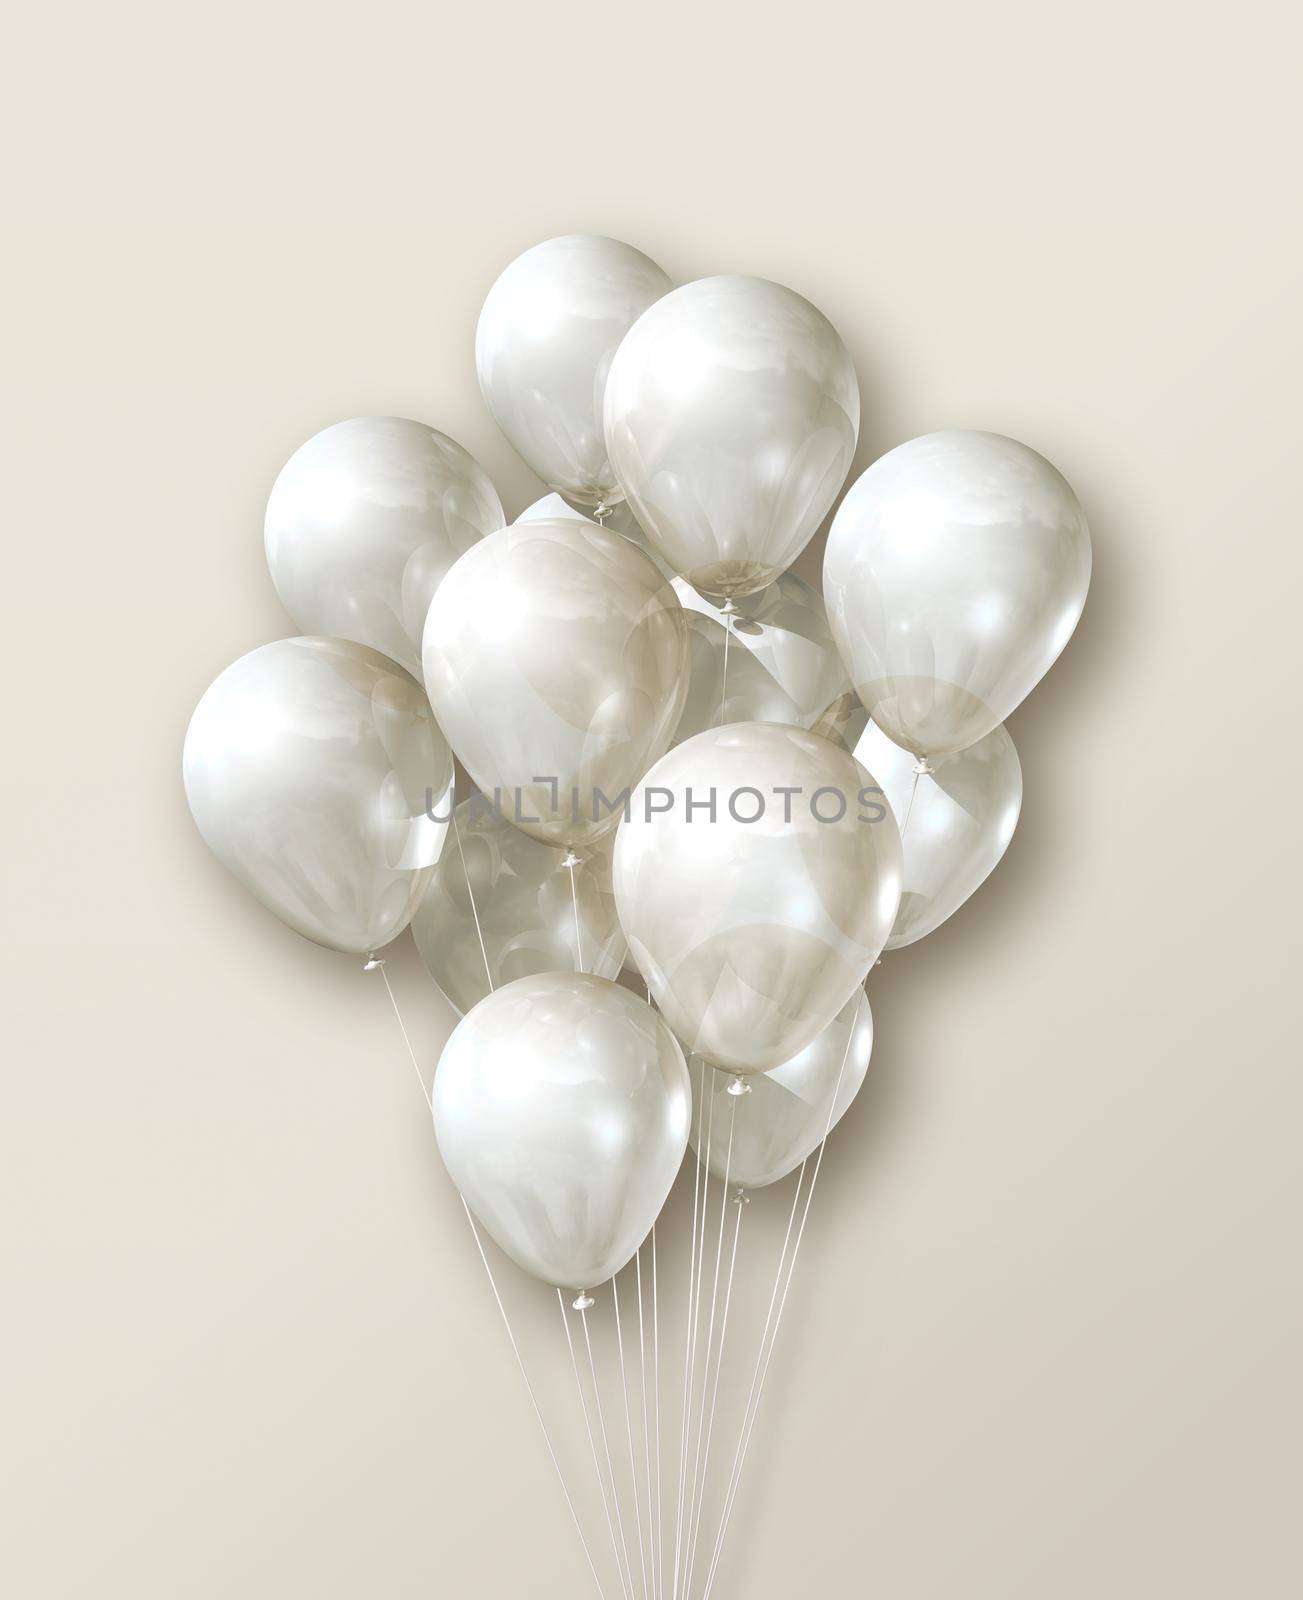 White air balloons group on a cream beige background by daboost